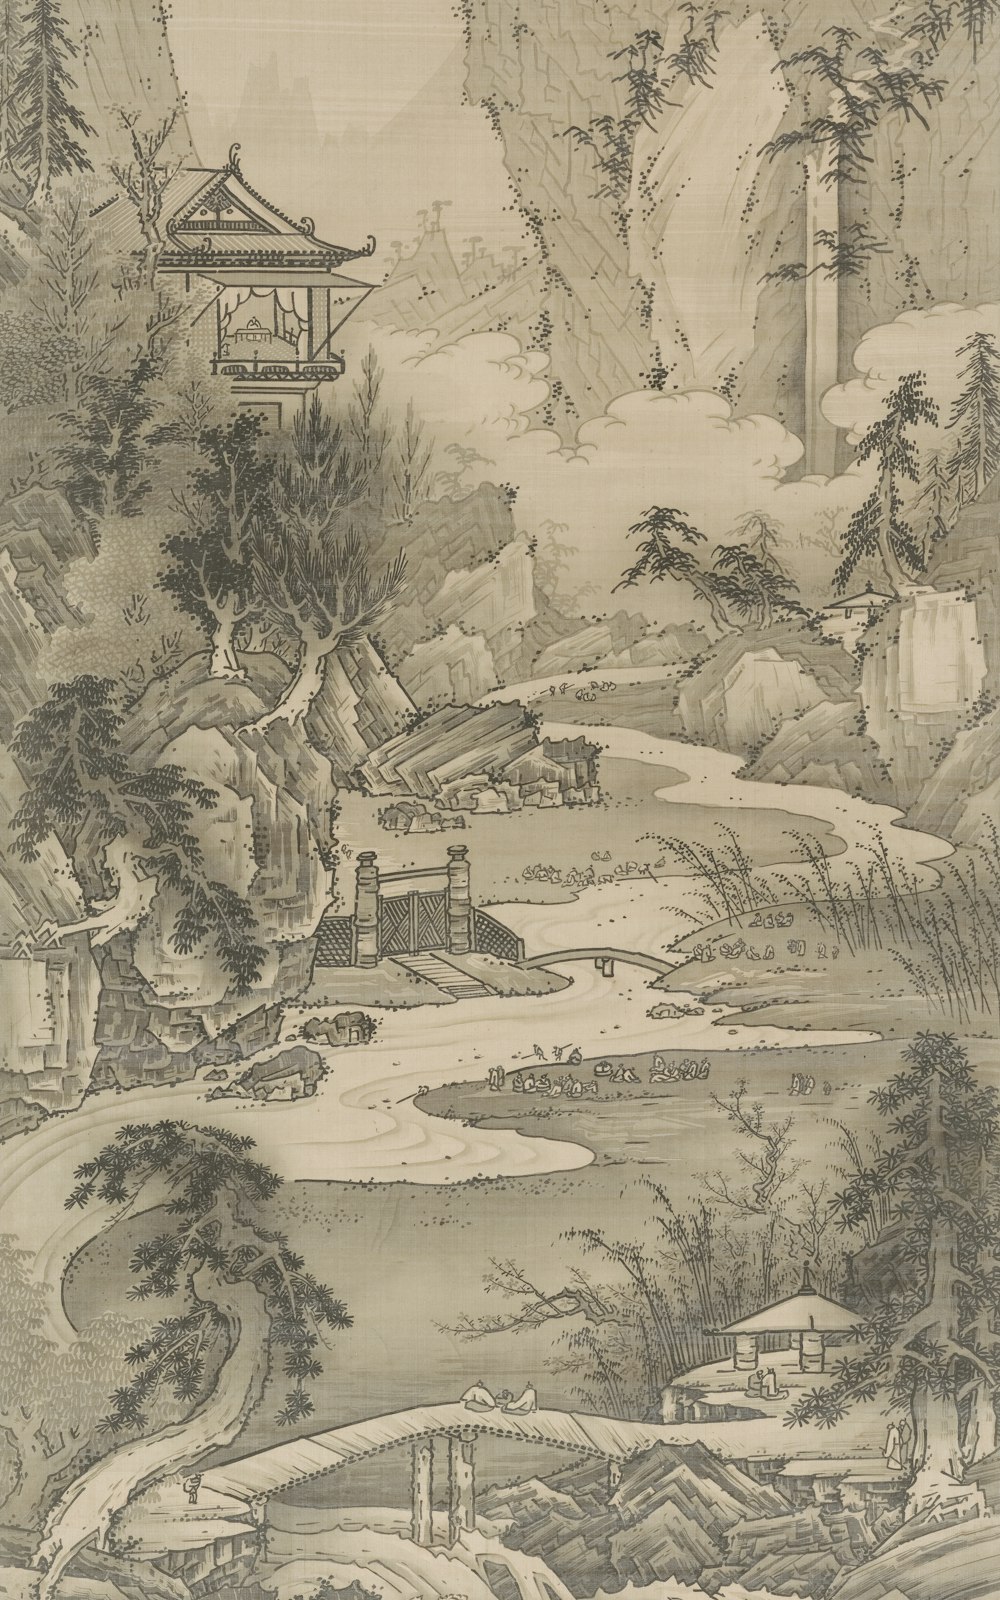 a drawing of a landscape with a pagoda in the background